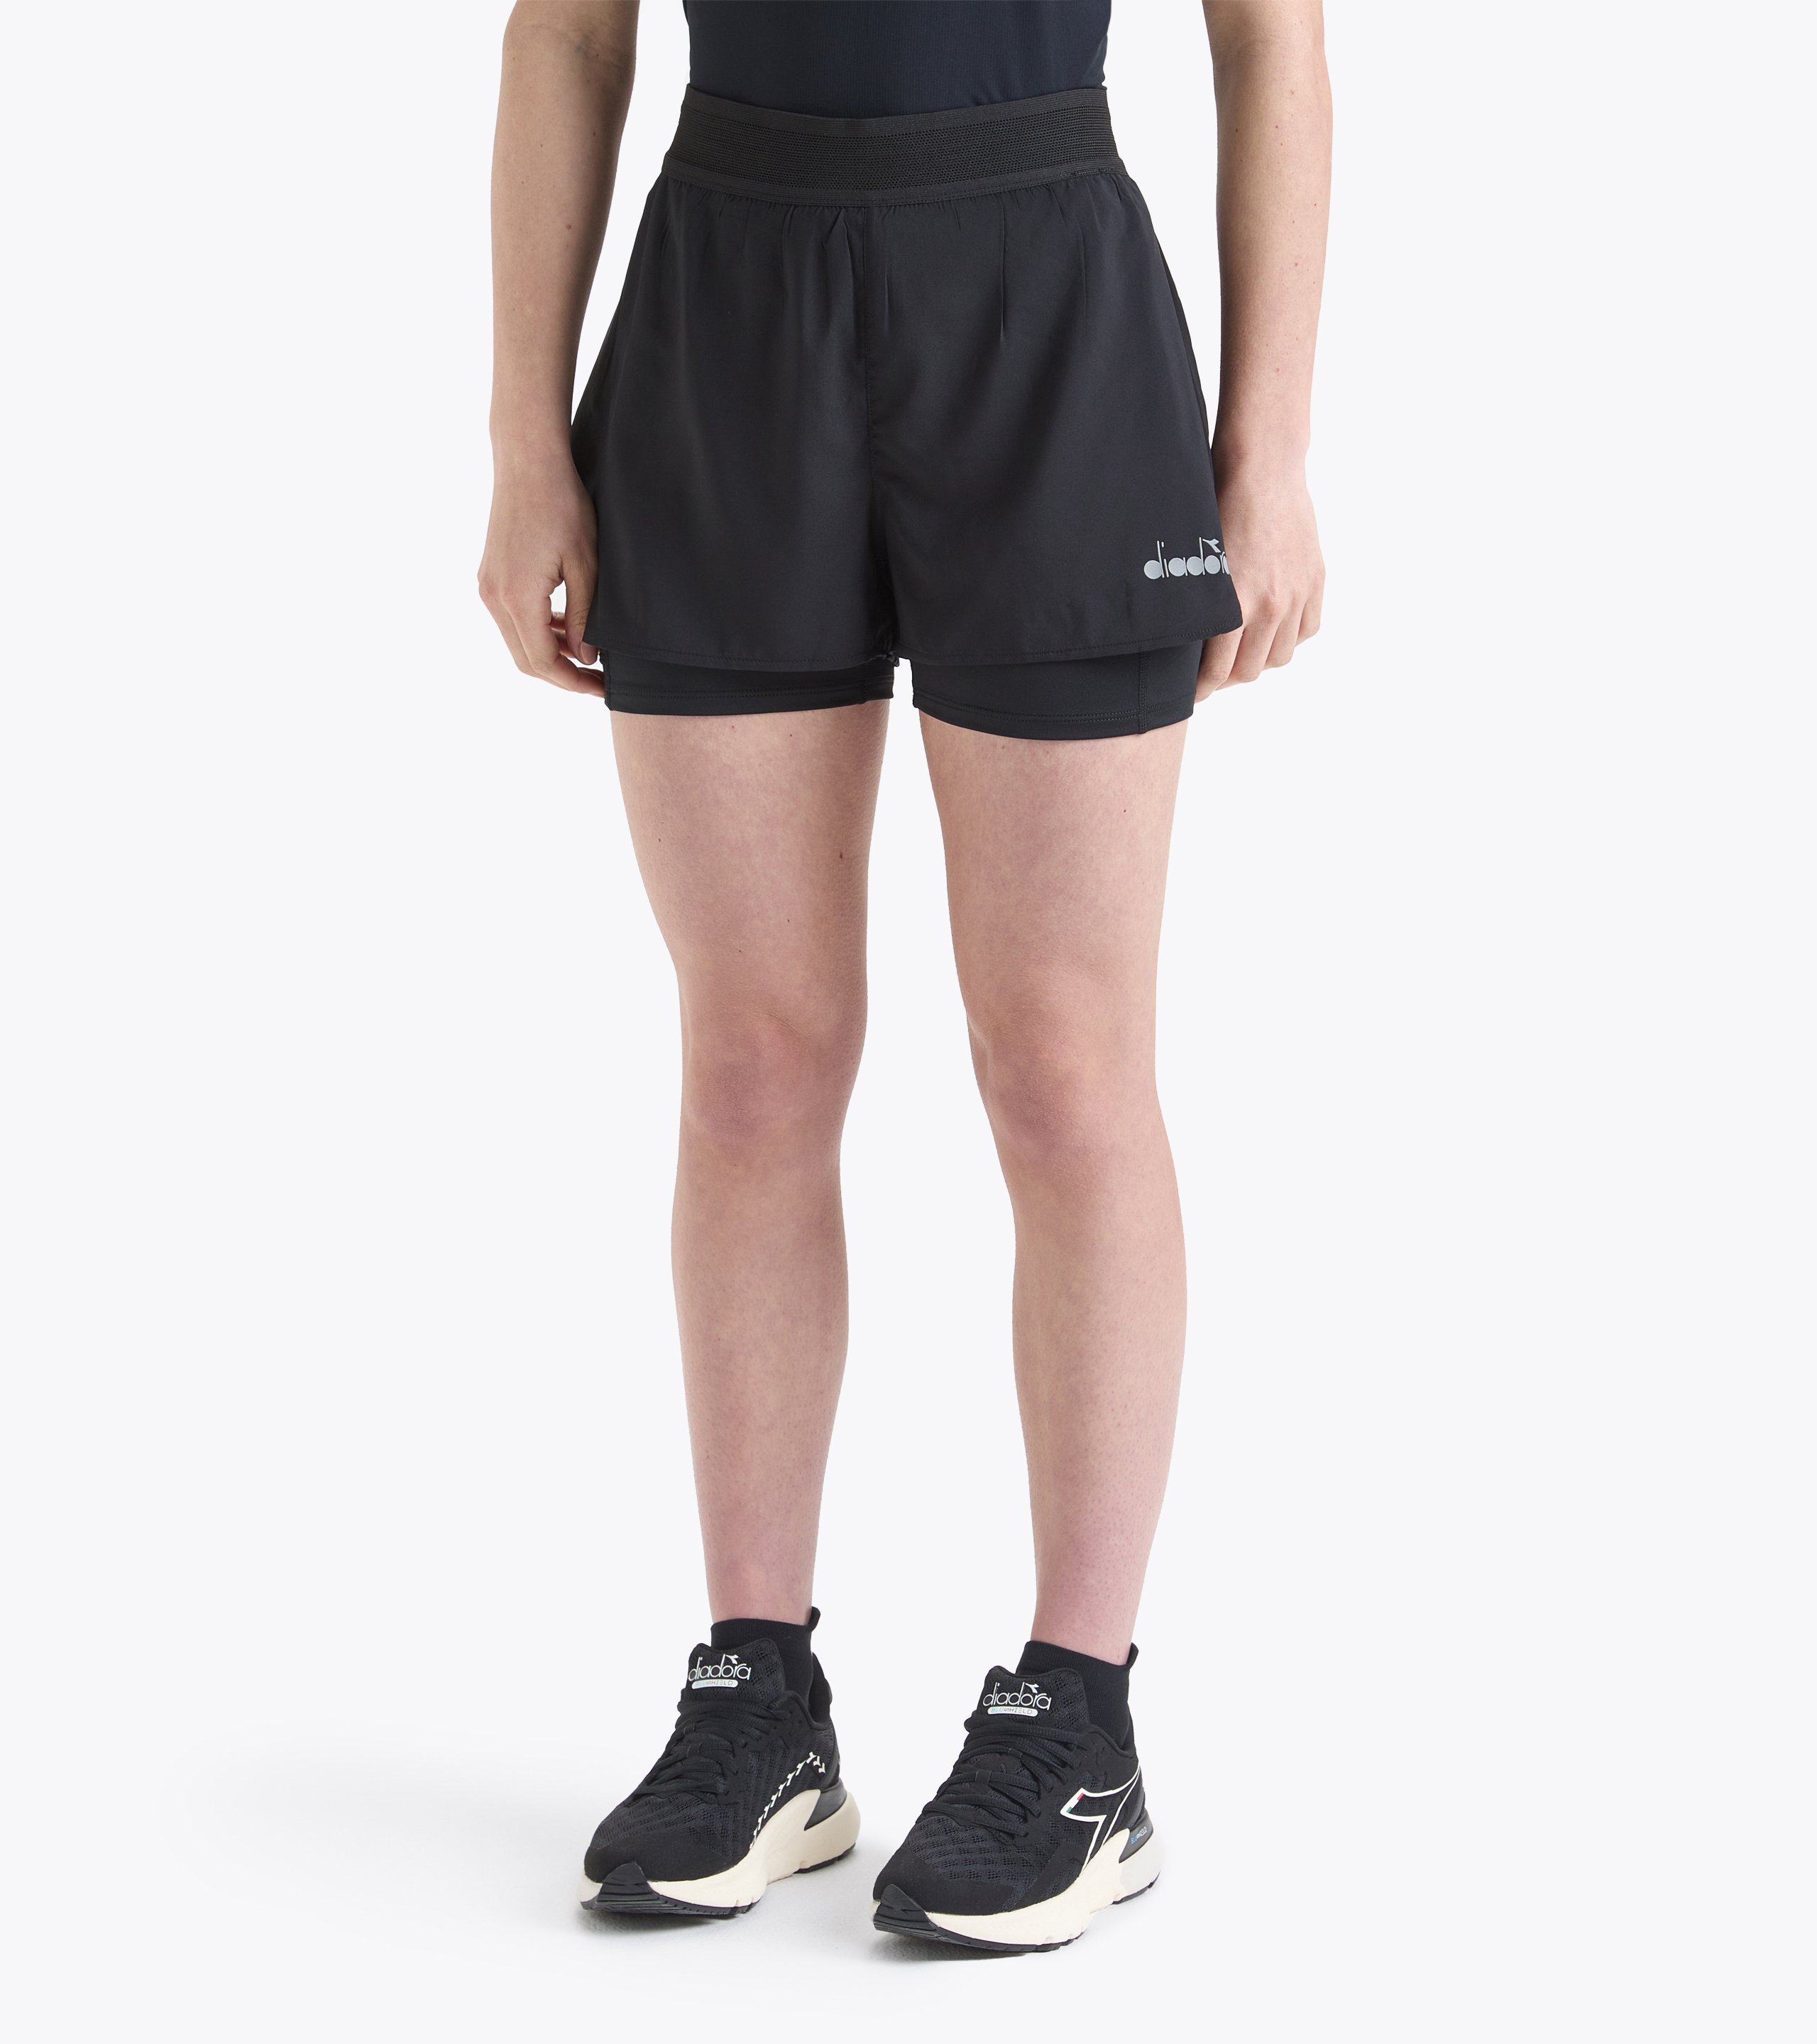 L. DOUBLE LAYER SHORTS BE ONE Running shorts - Women